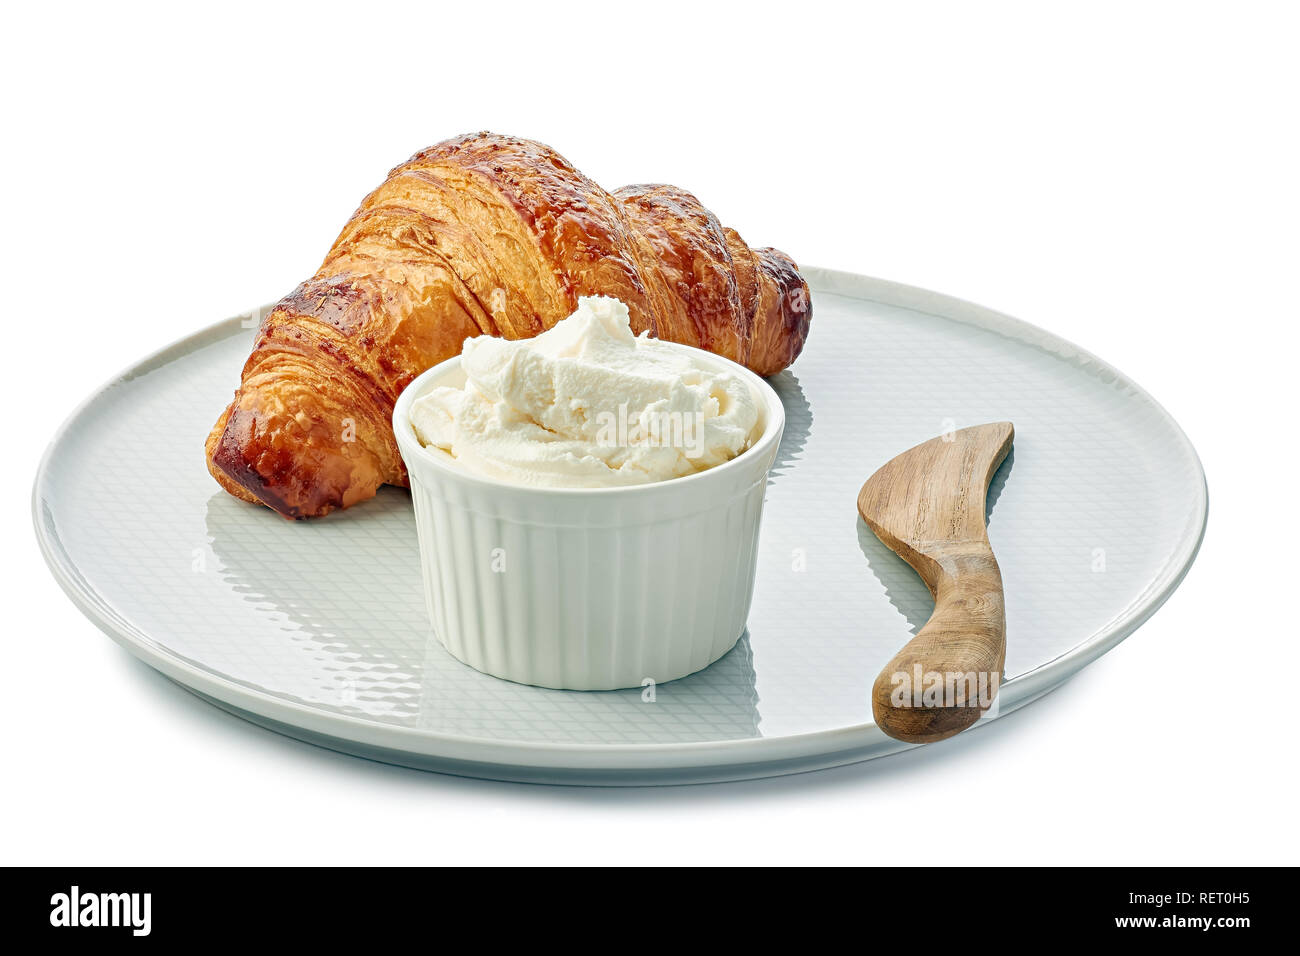 Fresh croissant and bowl of cream cheese on plate over white background Stock Photo